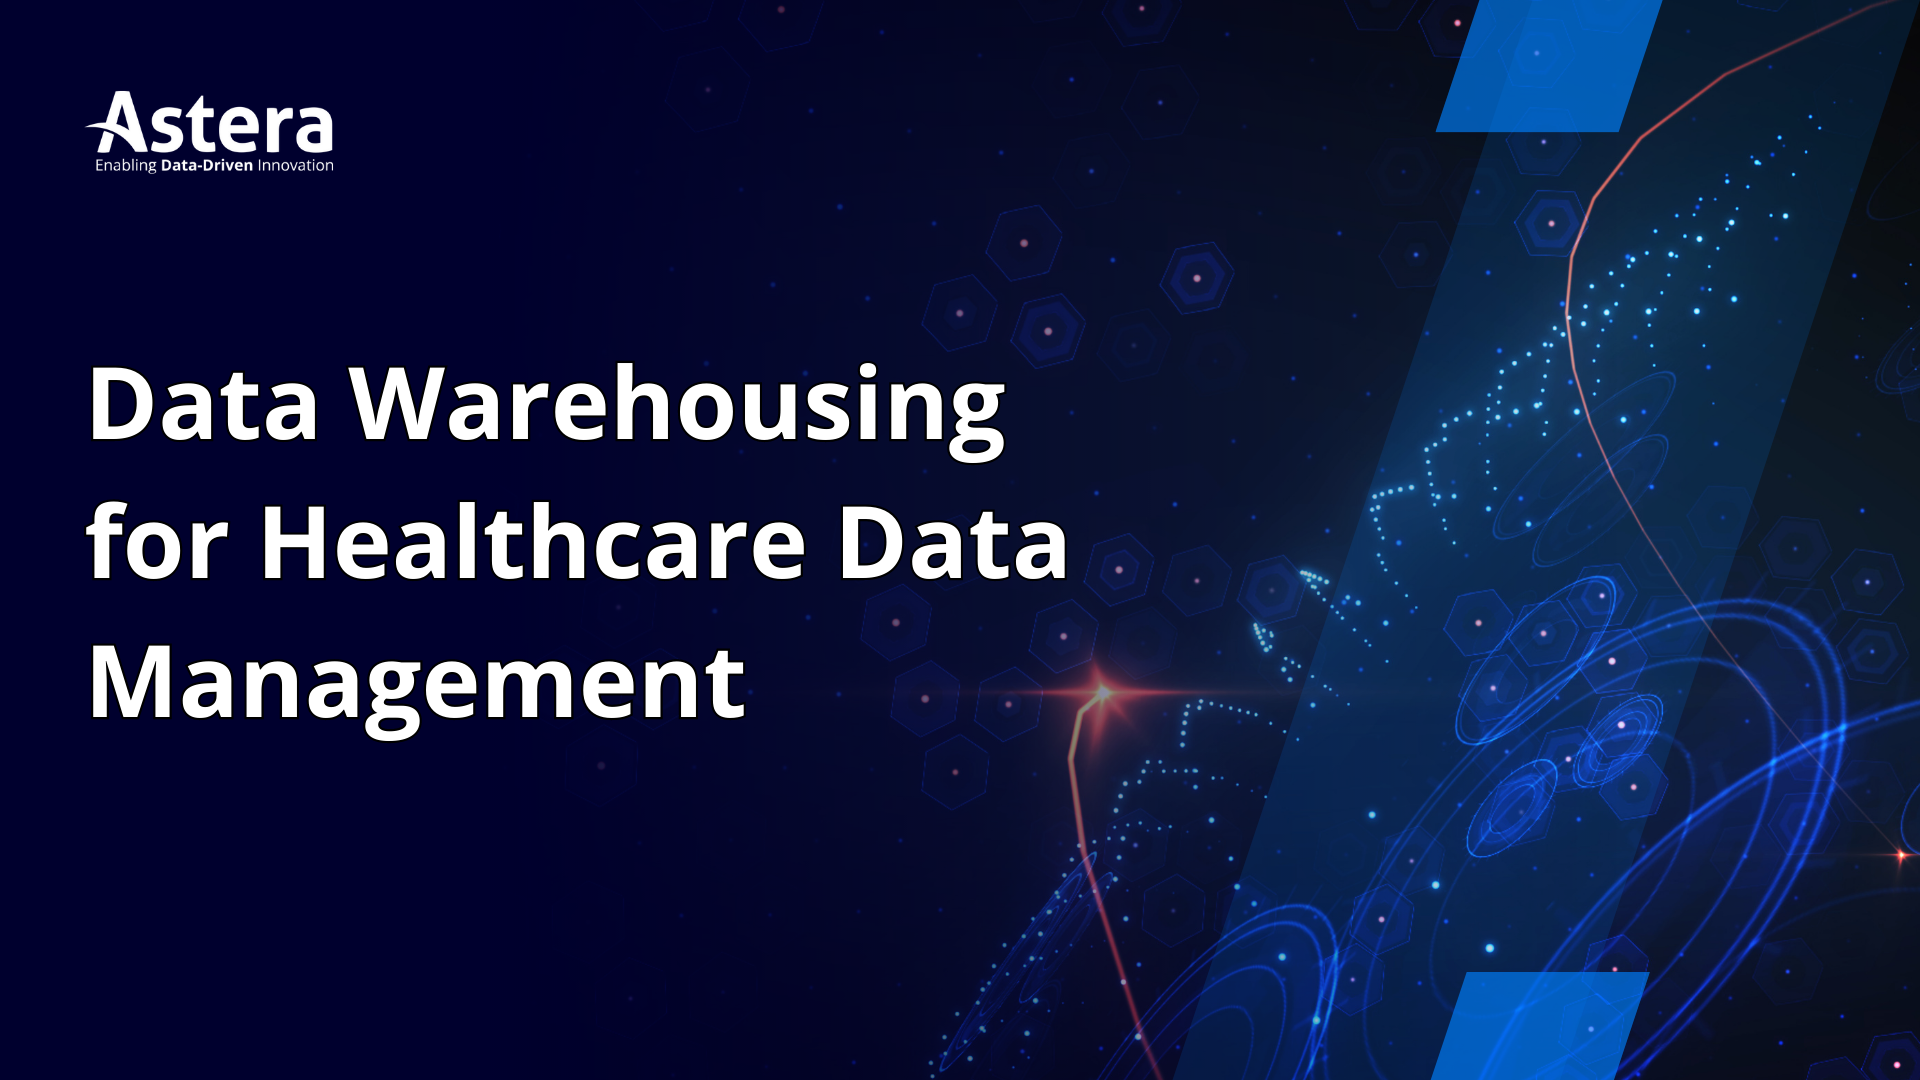 Healthcare Data Management with Data Warehousing